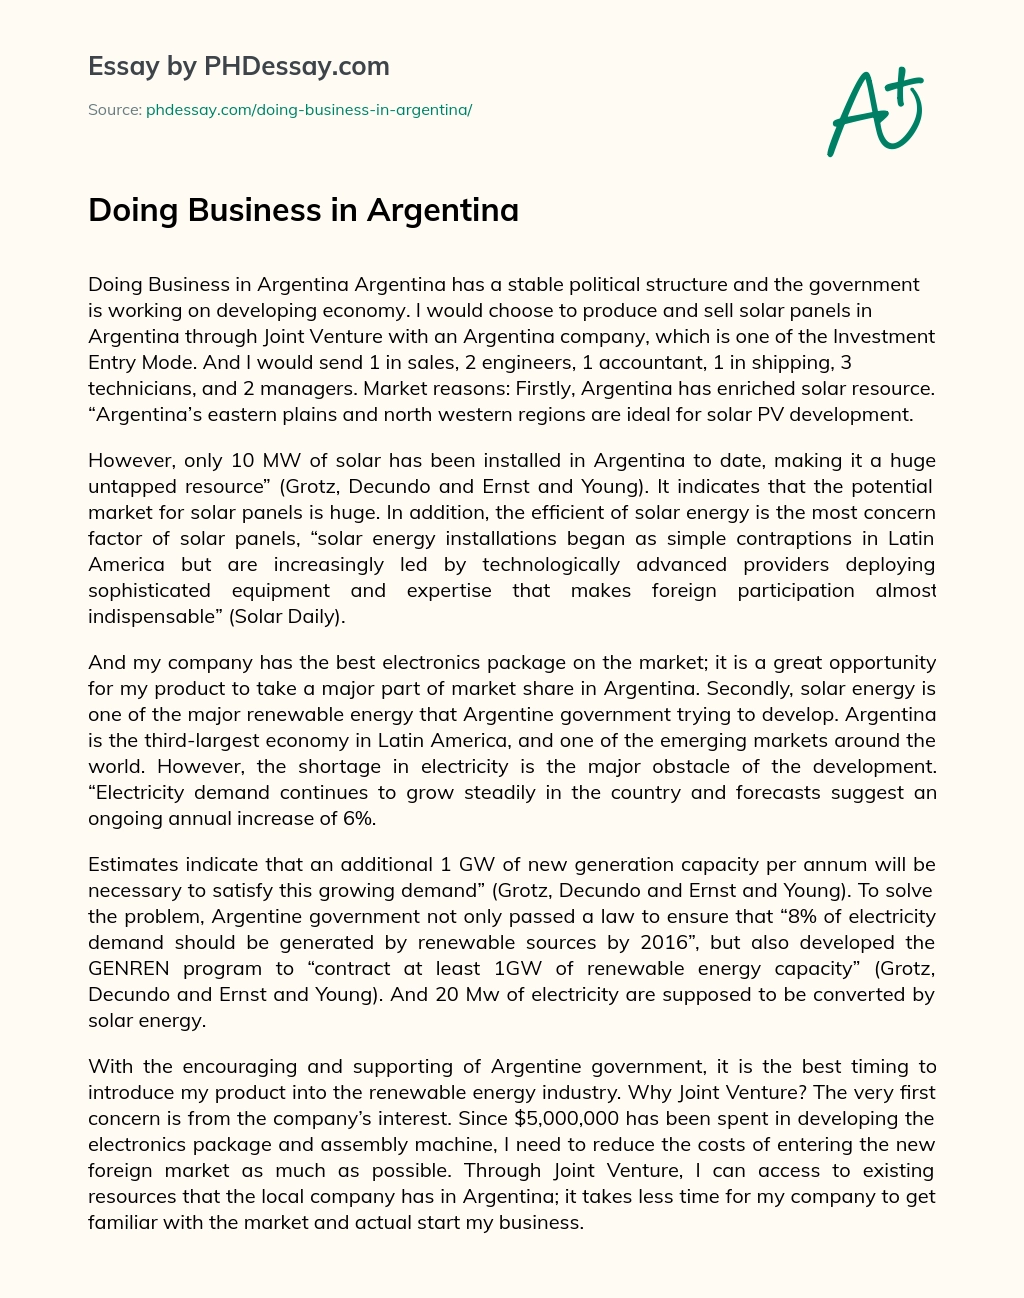 Doing Business in Argentina essay